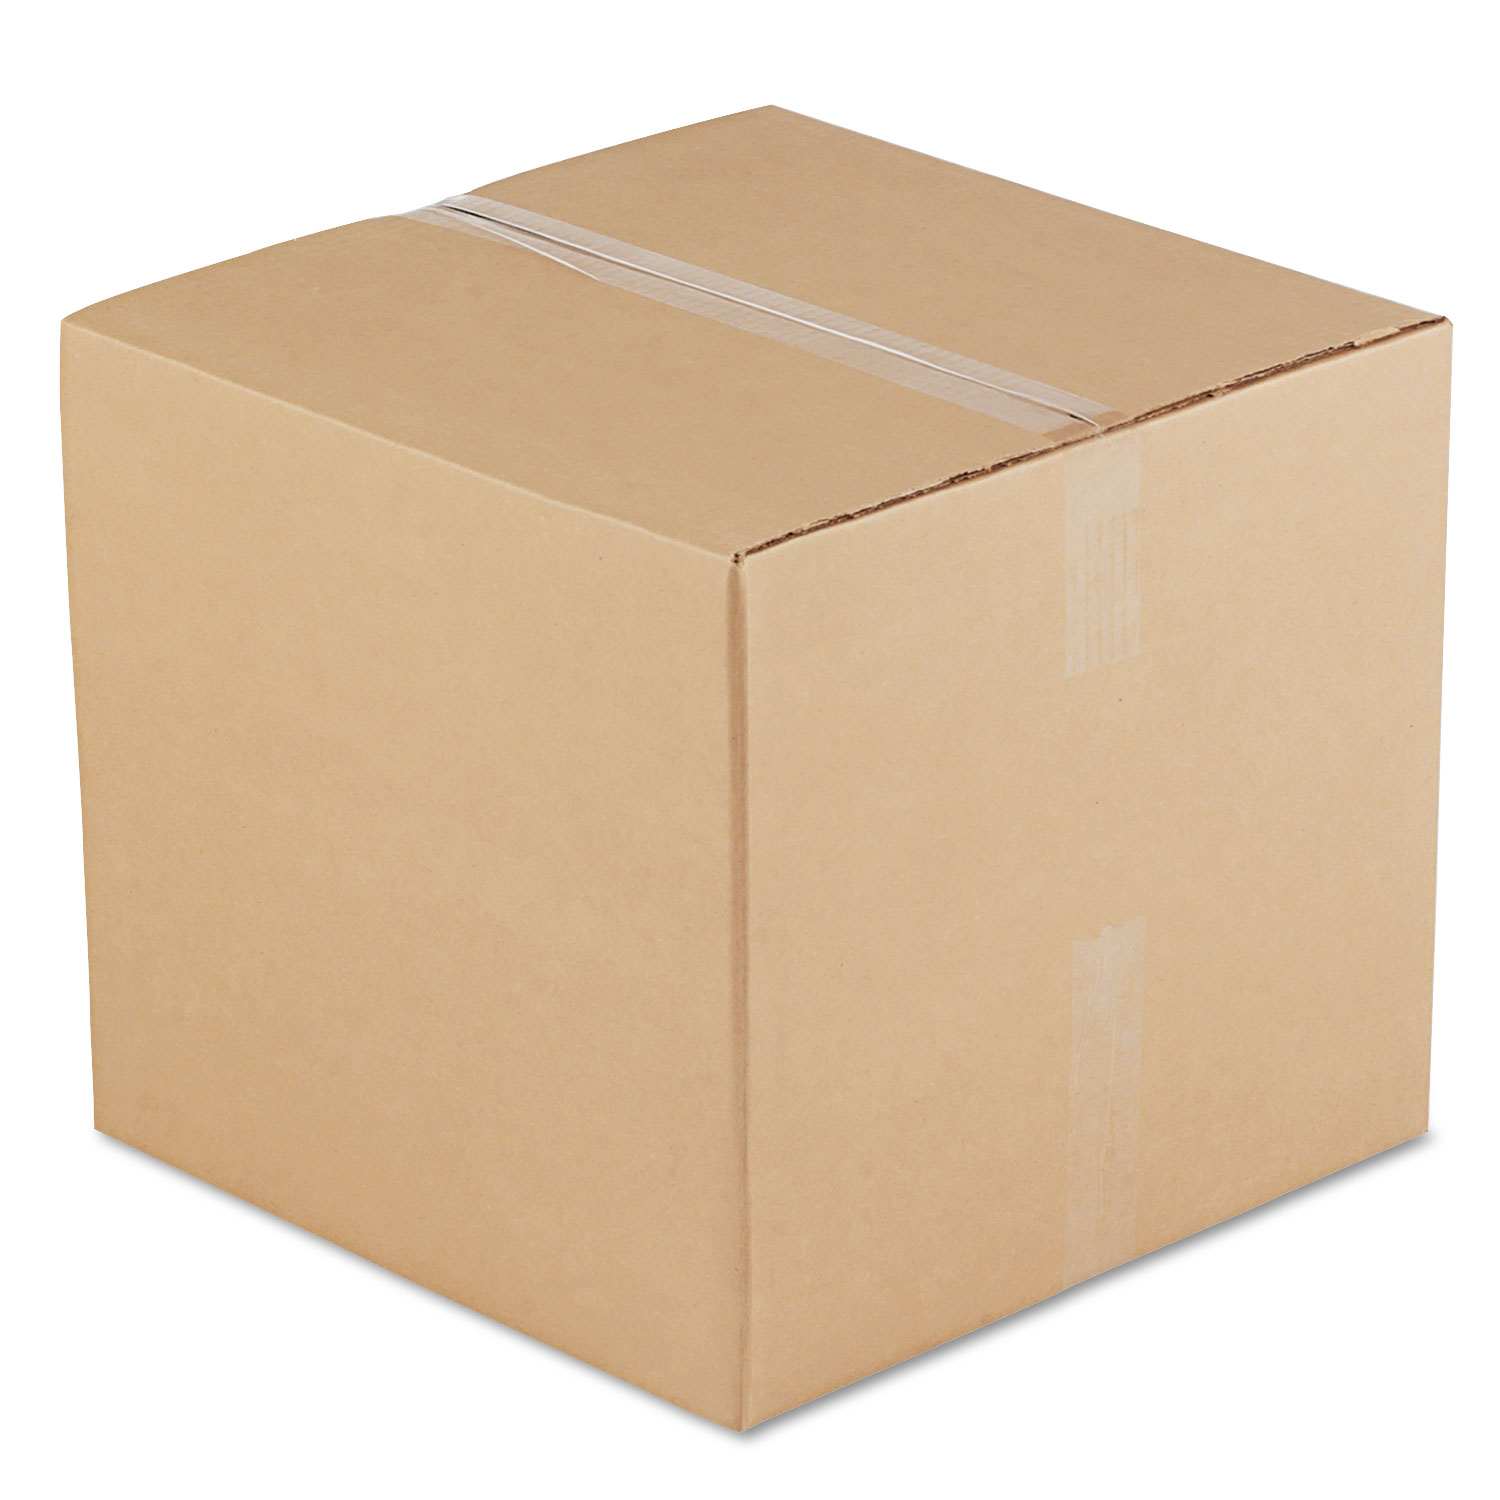 Fixed-Depth Shipping Boxes, Regular Slotted Container (RSC), 18